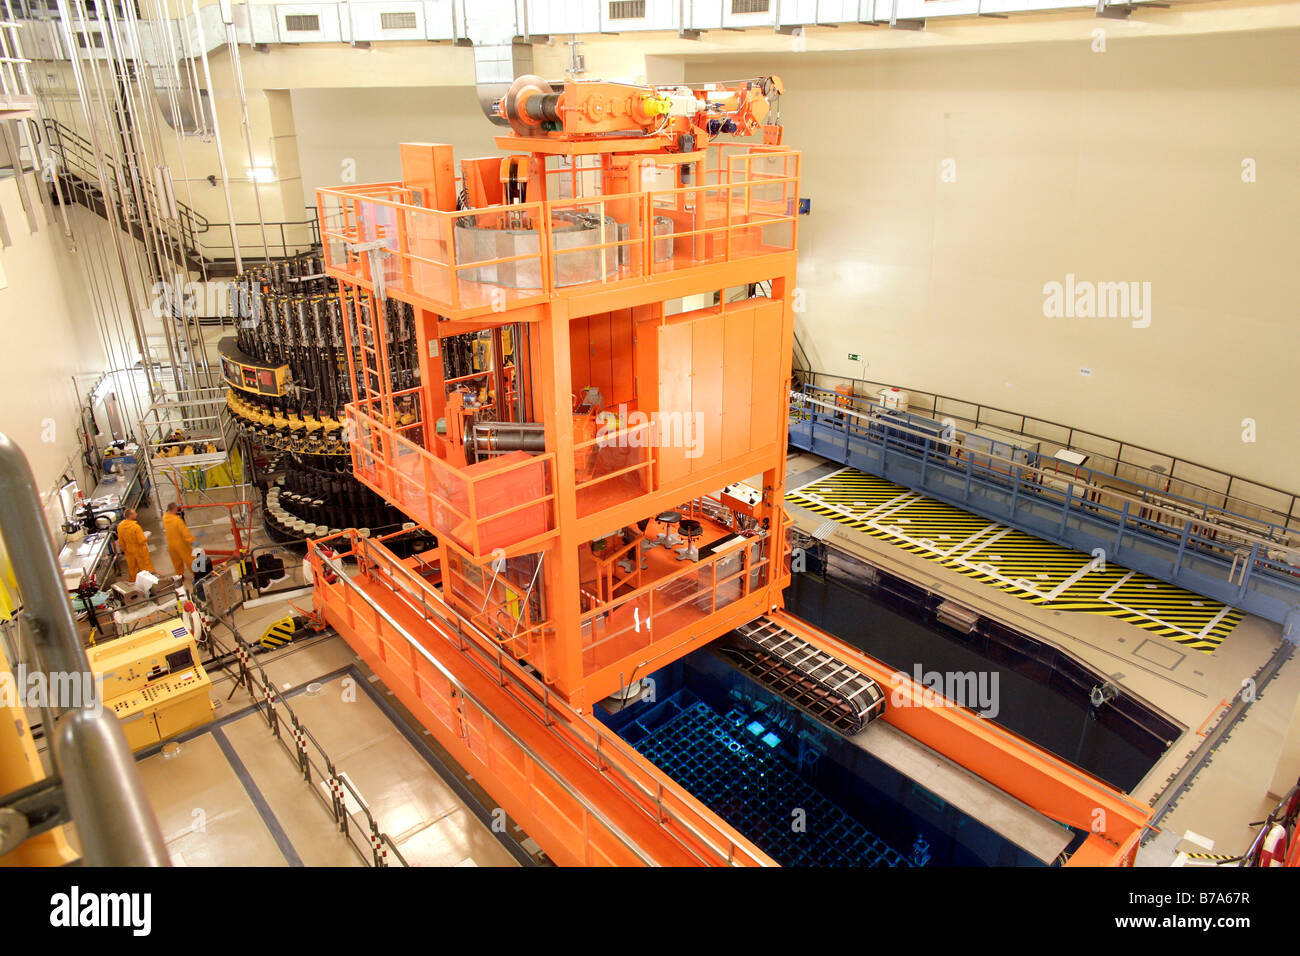 EON Nuclear Power Plant Isar II, reactor building, spent fuel pool, refueling stage, Essenbach, Bavaria, Germany, Europe Stock Photo